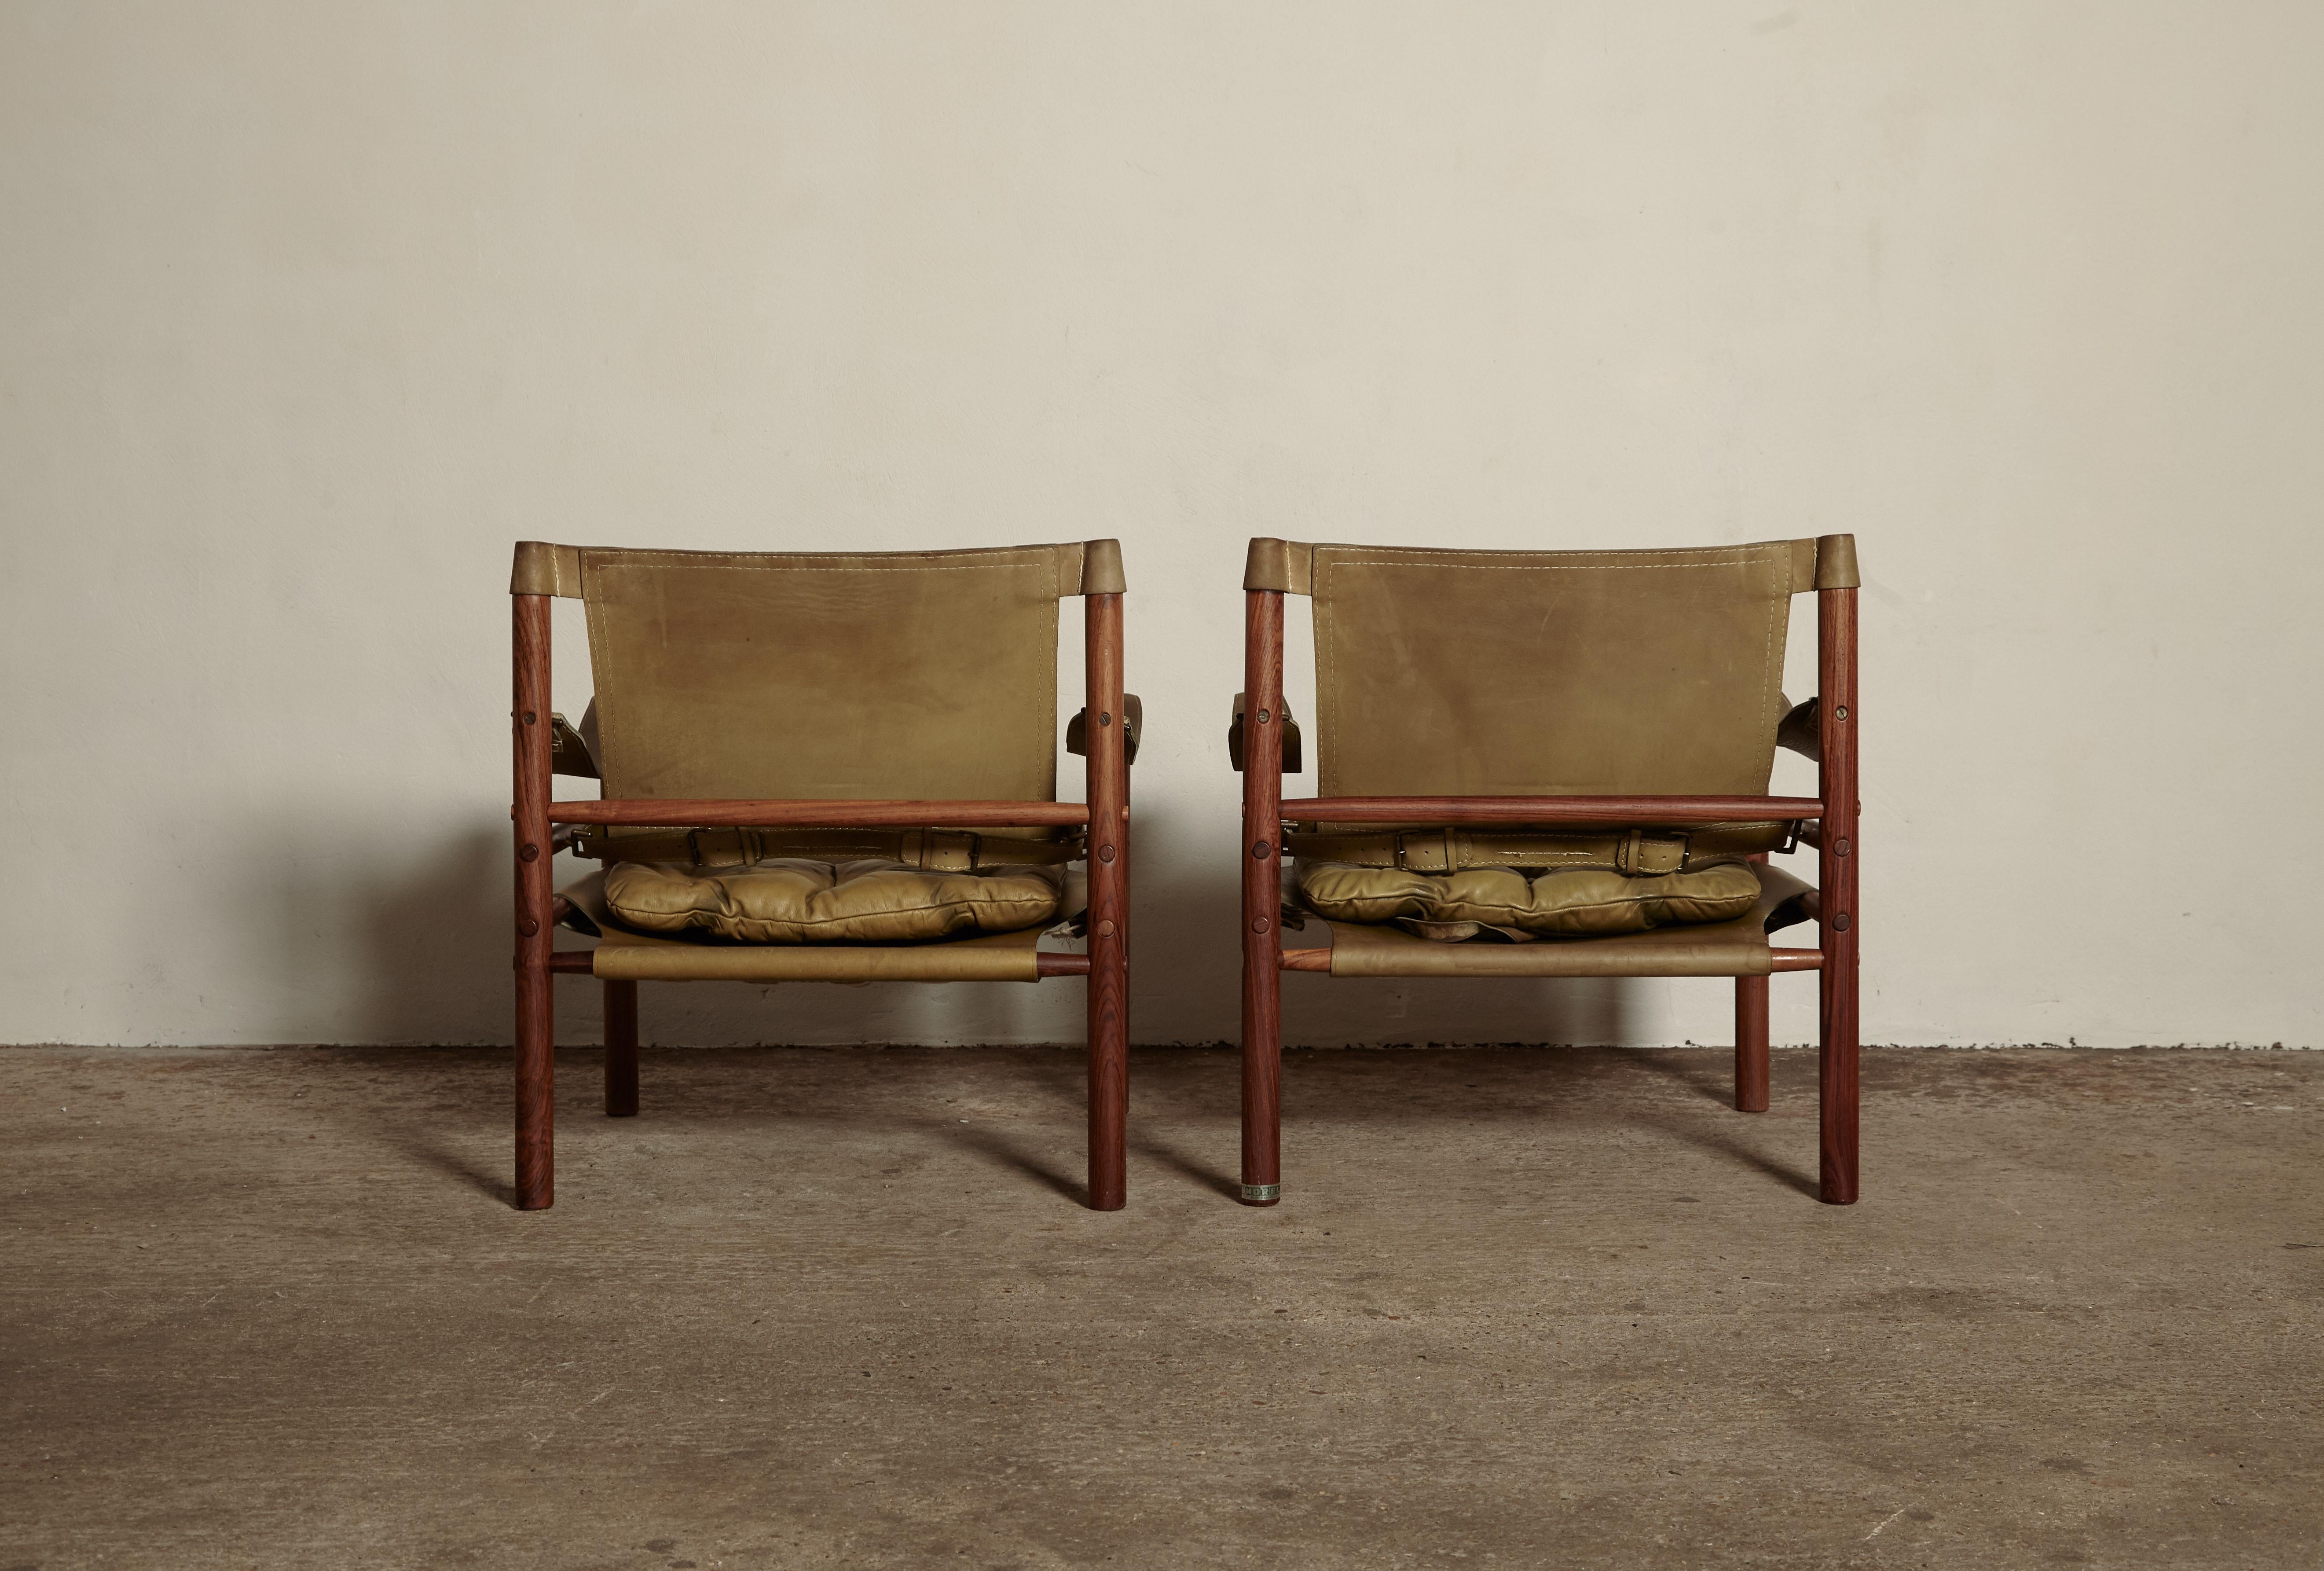 20th Century Pair of Arne Norell Safari Chairs, Green Leather, Sweden, 1970s